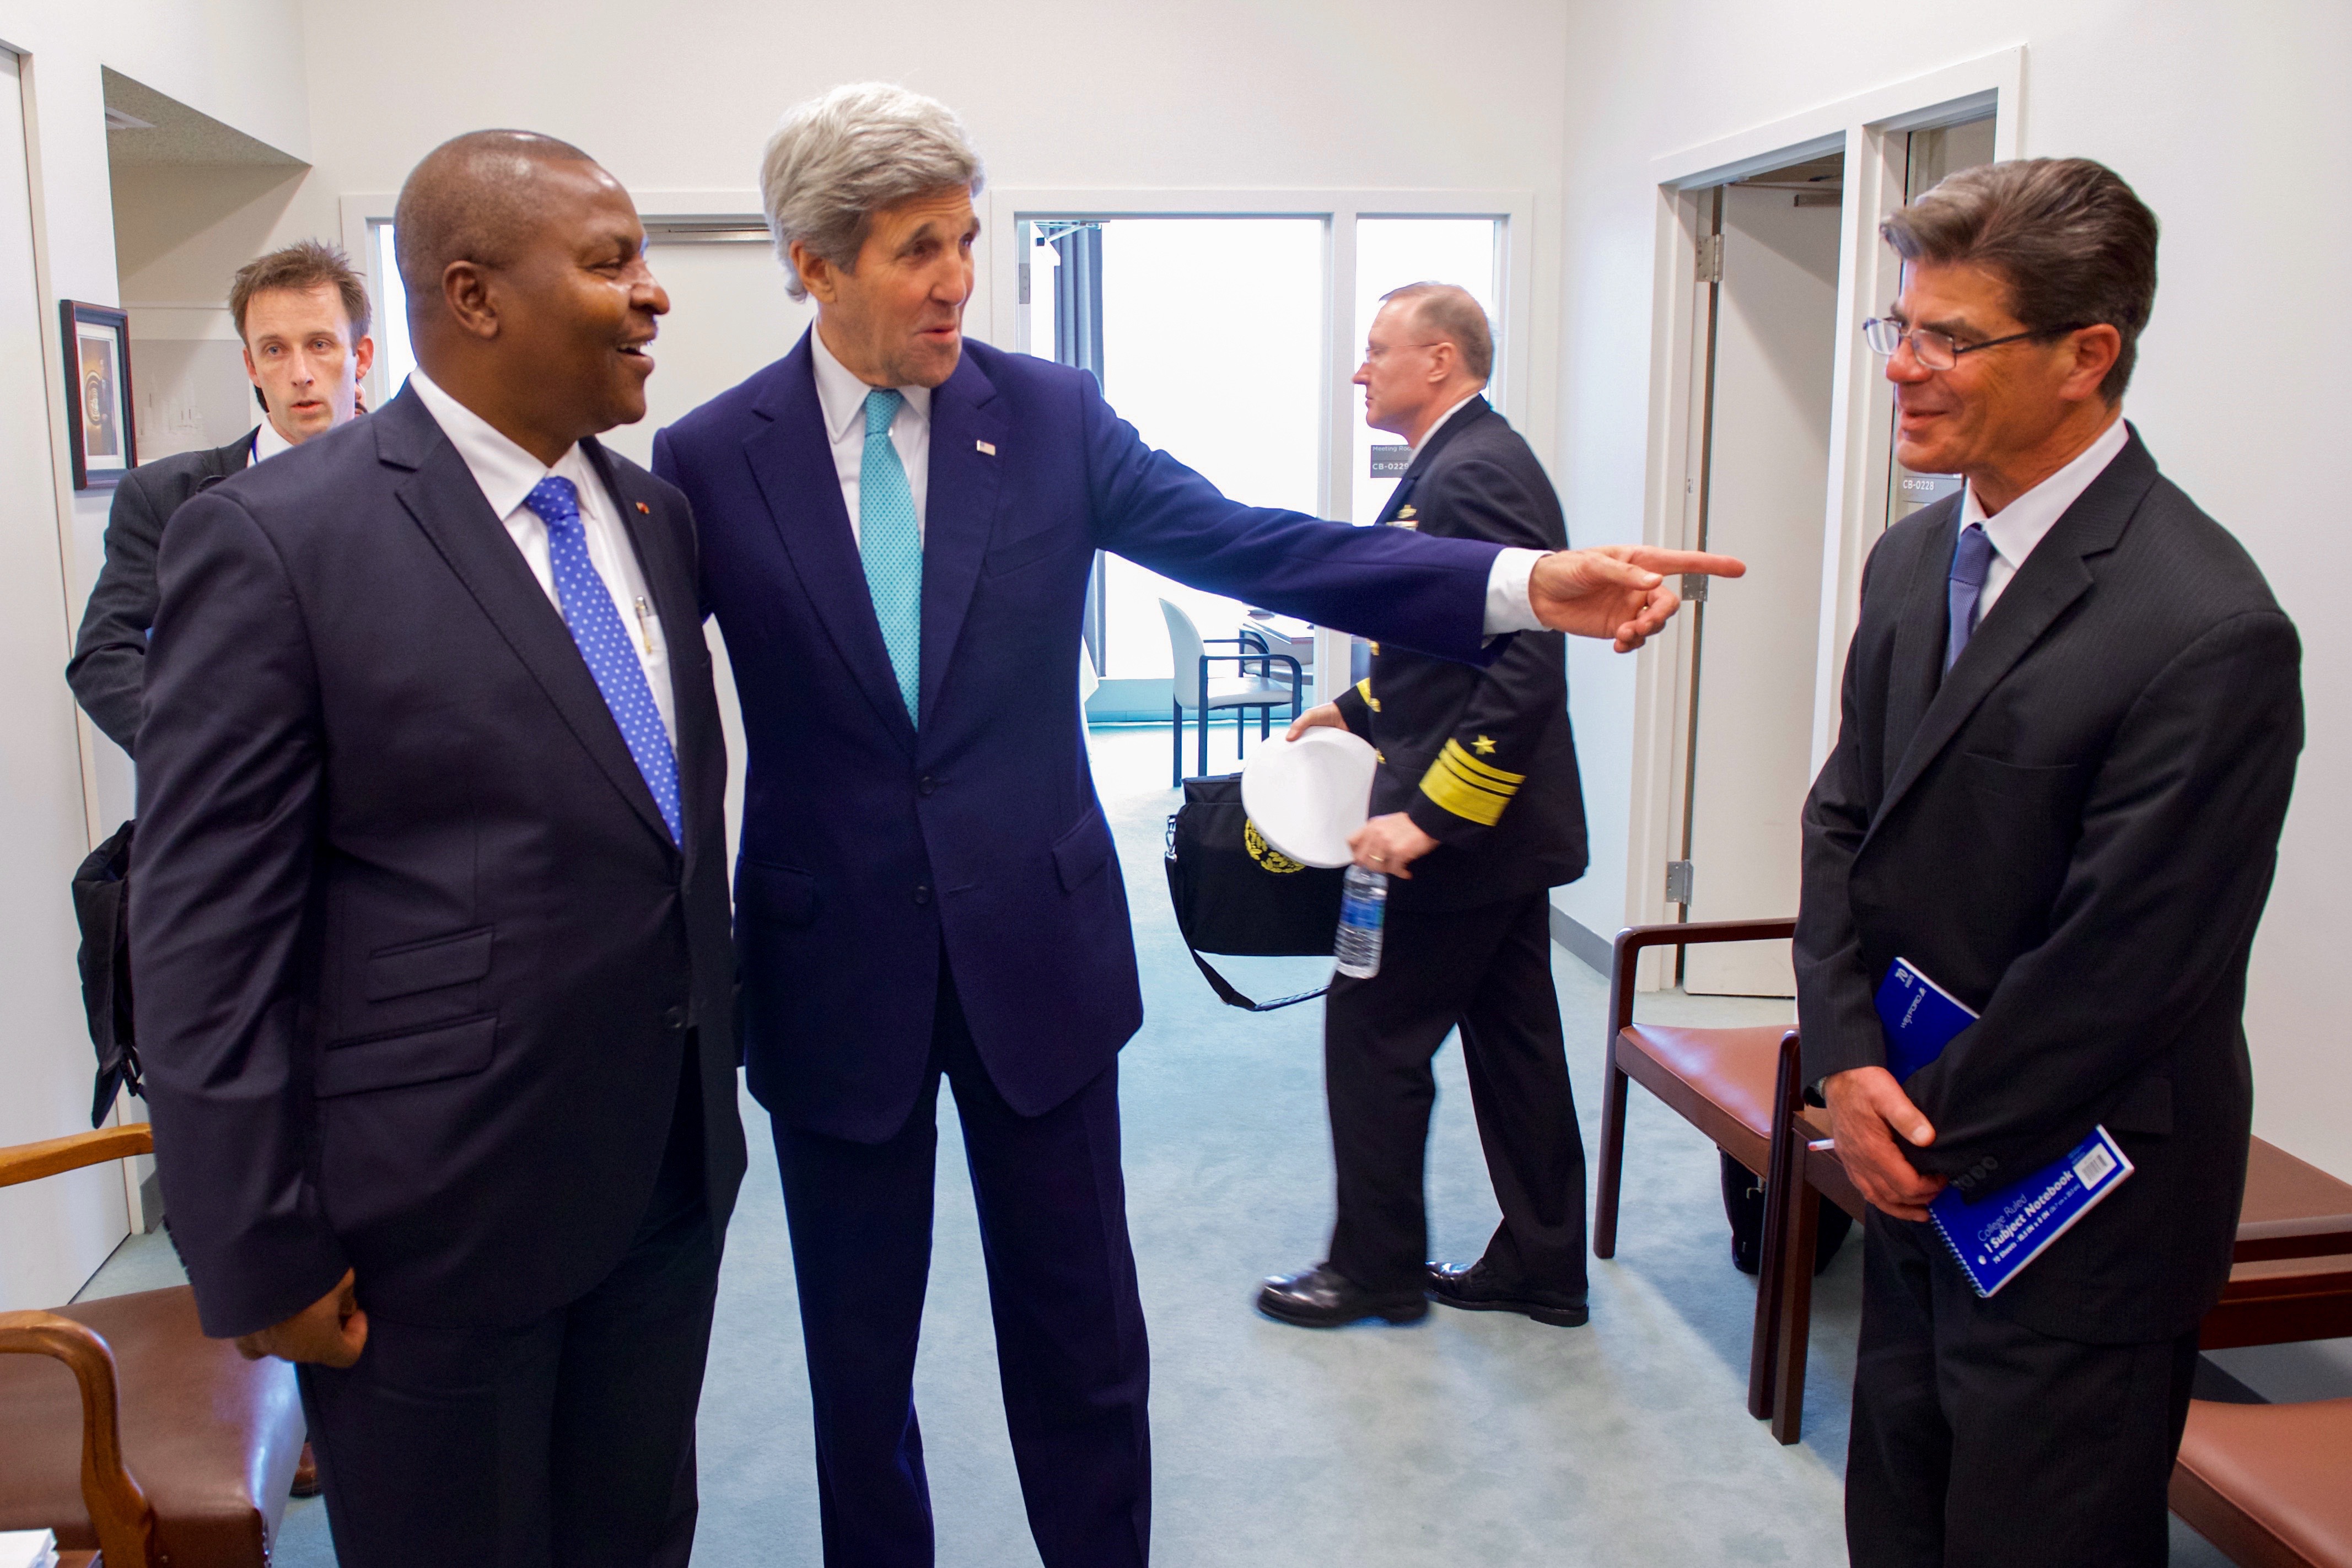 U.S. Secretary of State John Kerry, who speaks fluent French, points to his French interpreter on standby as he meets with Central African Republic (CAR) President Faustin-Archange Touadéra after both officials signed the COP21 Climate Change Agreement on Earth Day, April 22, 2016, at the United Nations Headquarters in New York, N.Y. [State Department photo/ Public Domain] [State Department photo/ Public Domain]